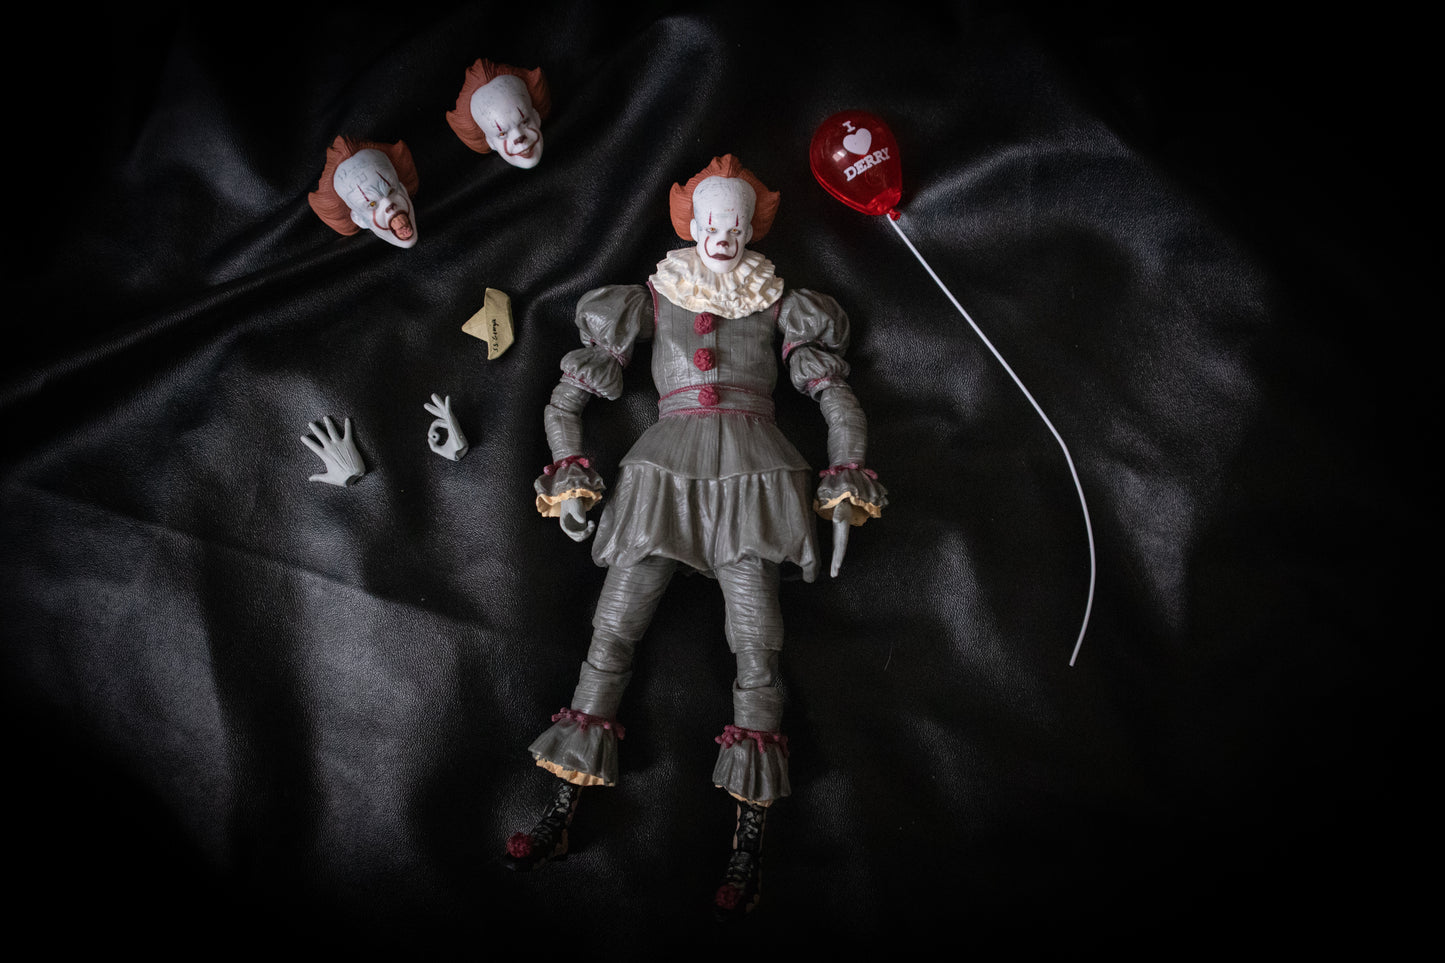 Pennywise Clown Action Figurine